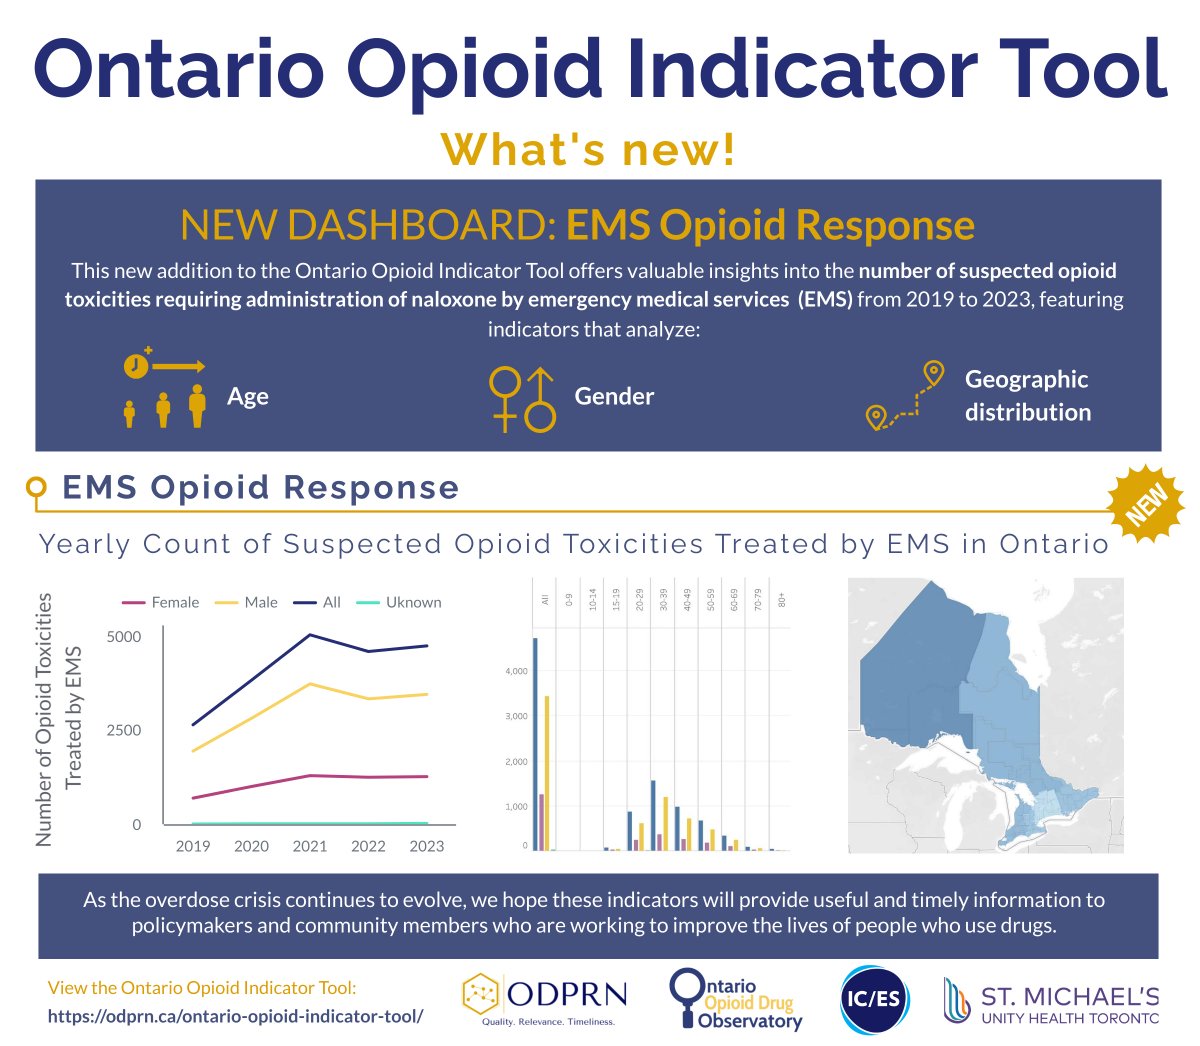 ODPRN's new interactive dashboard offers valuable insights into the number of suspected opioid toxicities requiring administration of naloxone by EMS from 2019 to 2023. odprn.ca/ontario-opioid… #drugtoxicity #opioid #opioids #EMS #Ontario #Naloxone